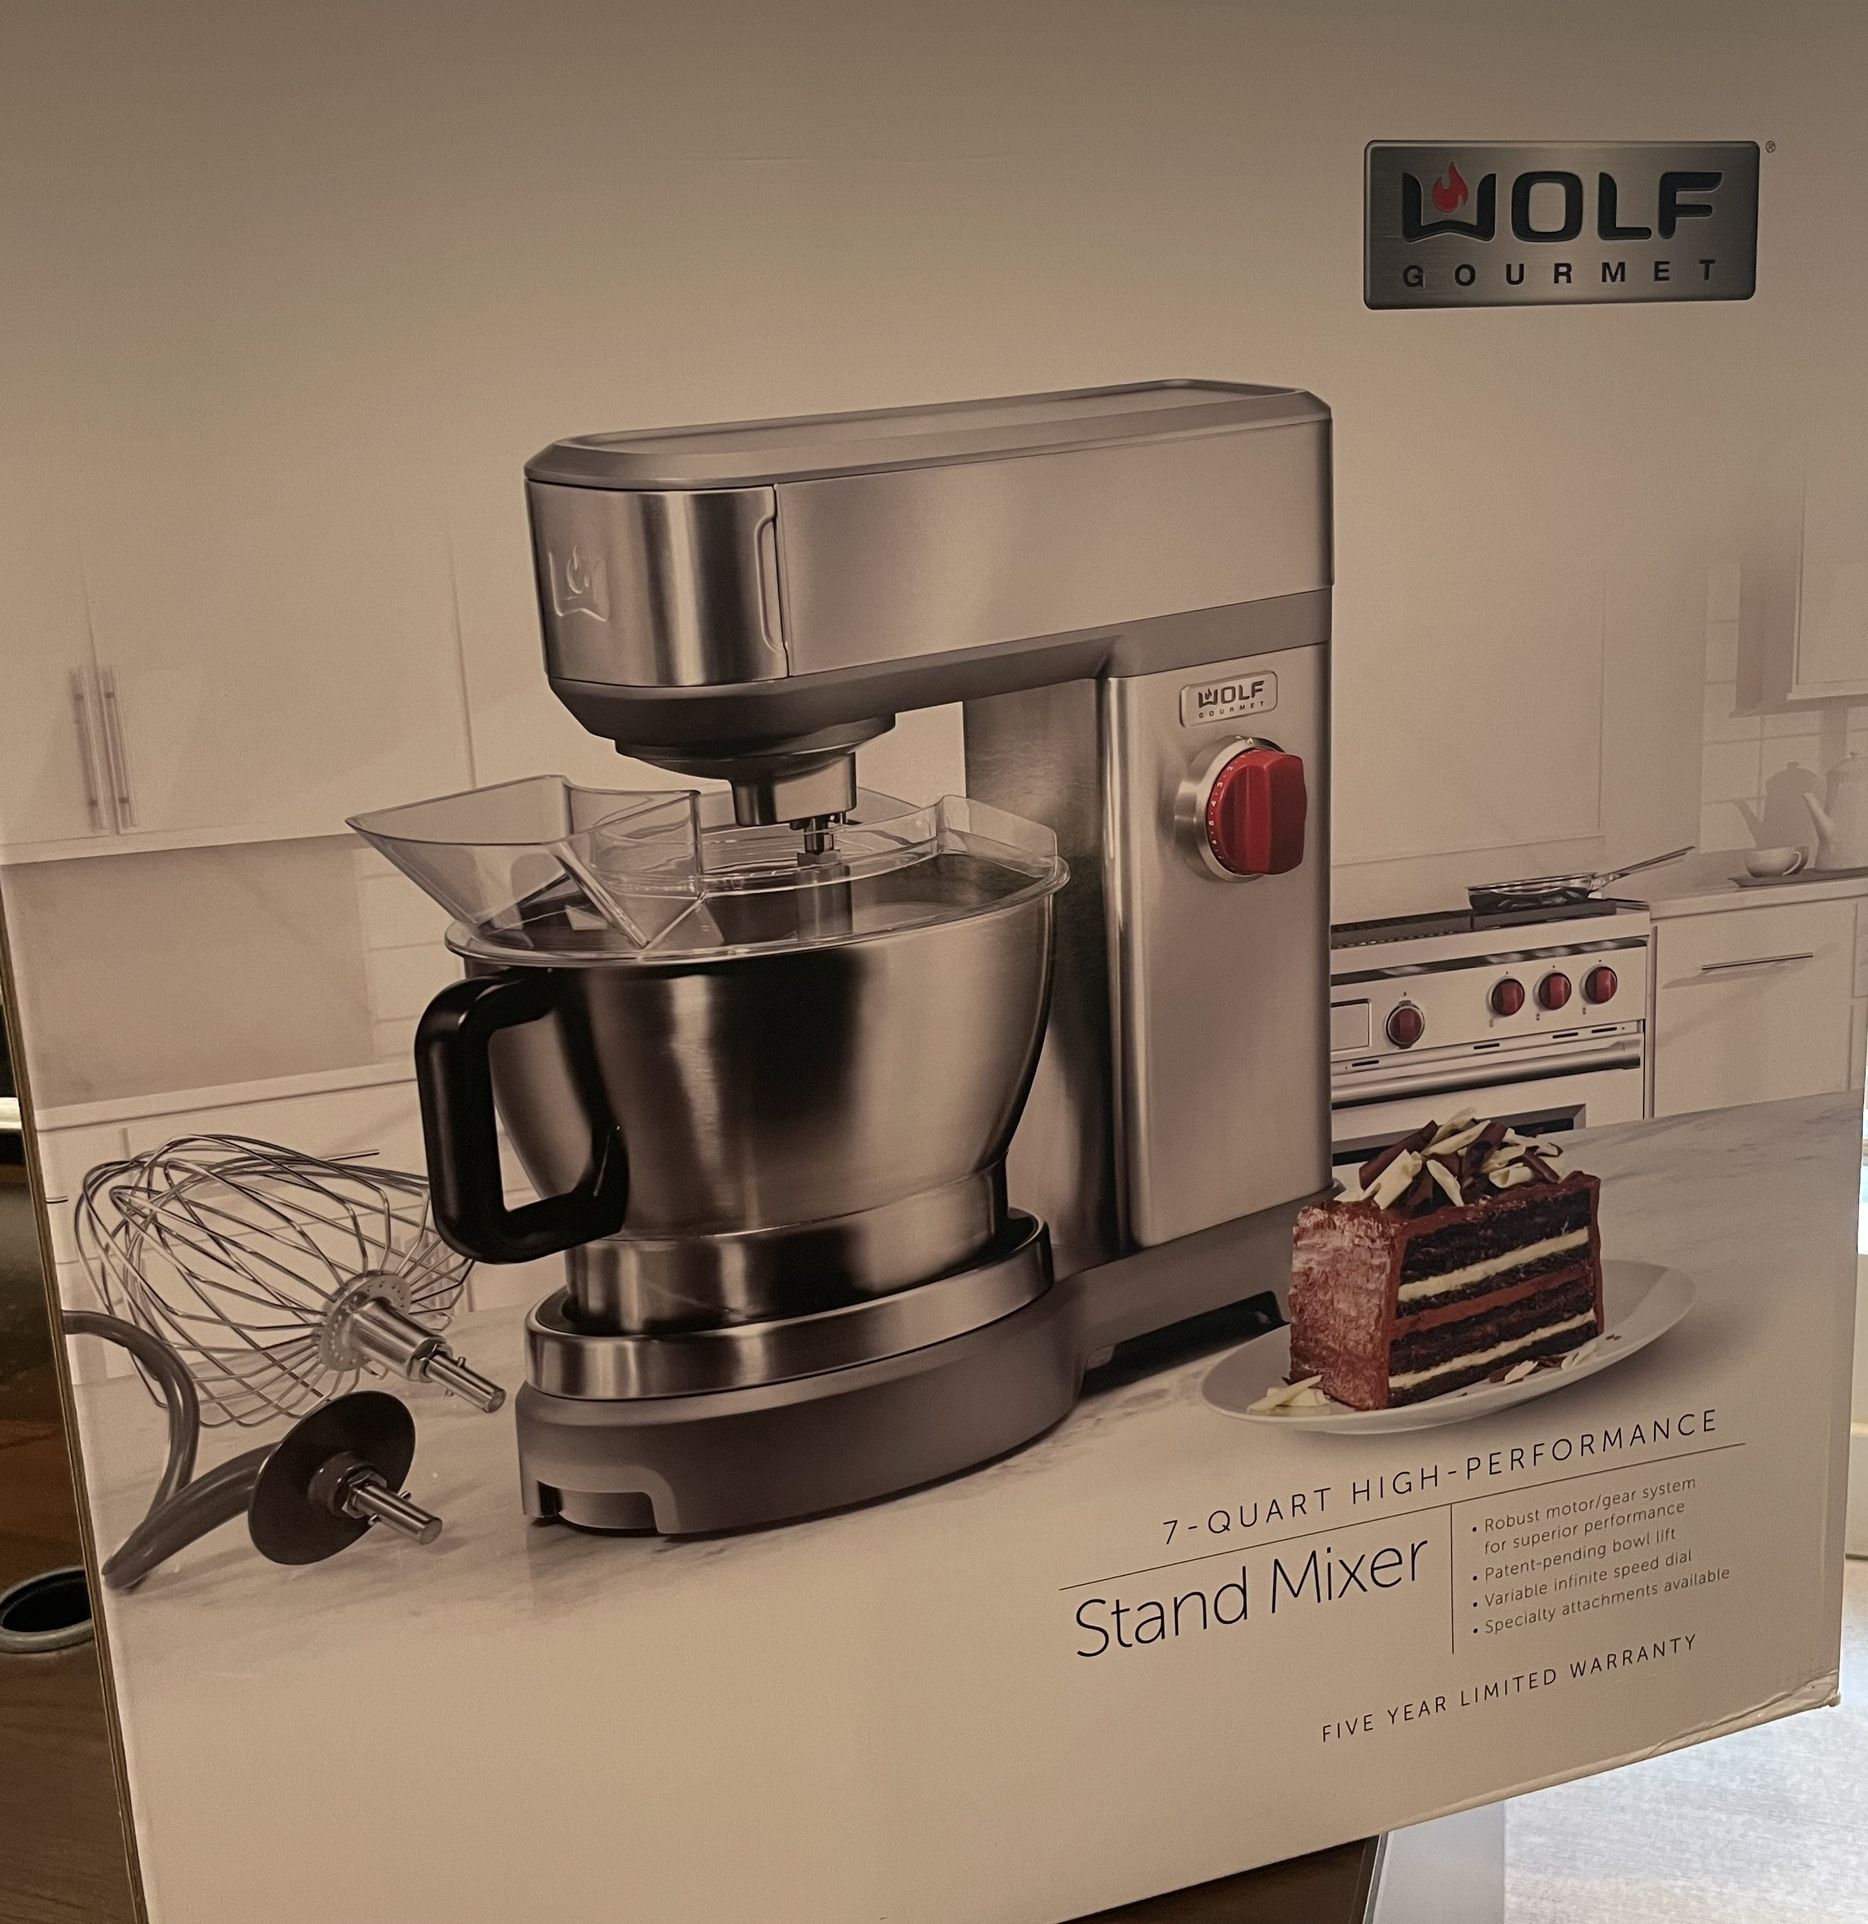 Wolf Gourmet Mixer for Sale in Katy, TX - OfferUp